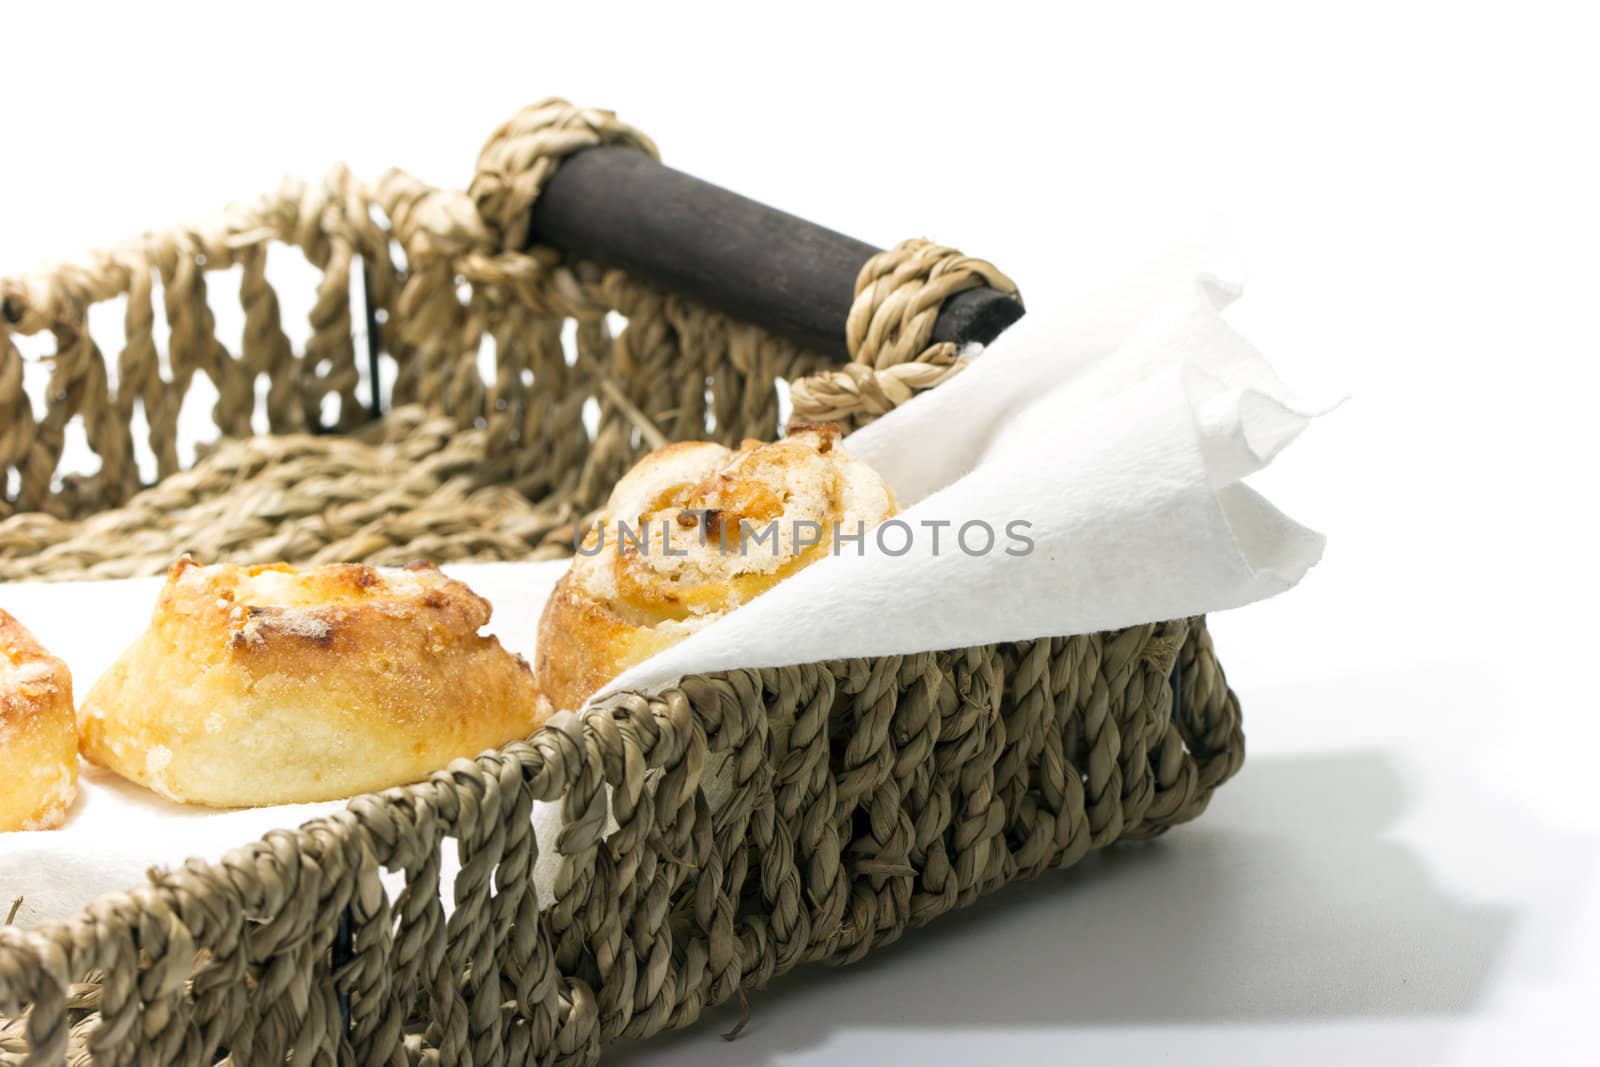 Homemade Cookies in a basket on a white background